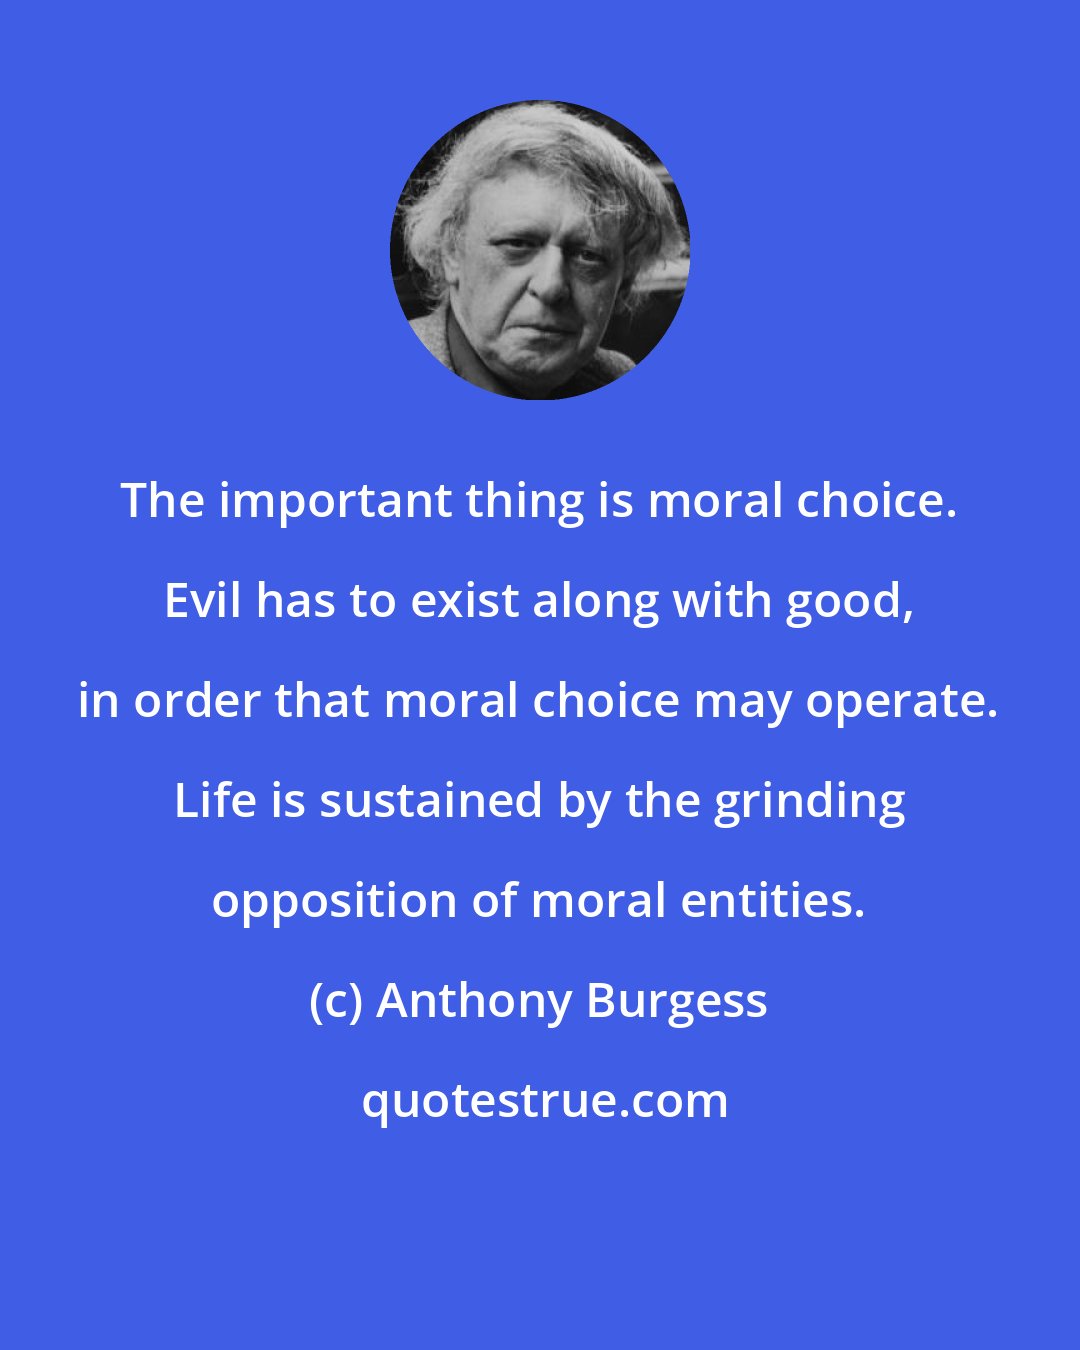 Anthony Burgess: The important thing is moral choice. Evil has to exist along with good, in order that moral choice may operate. Life is sustained by the grinding opposition of moral entities.